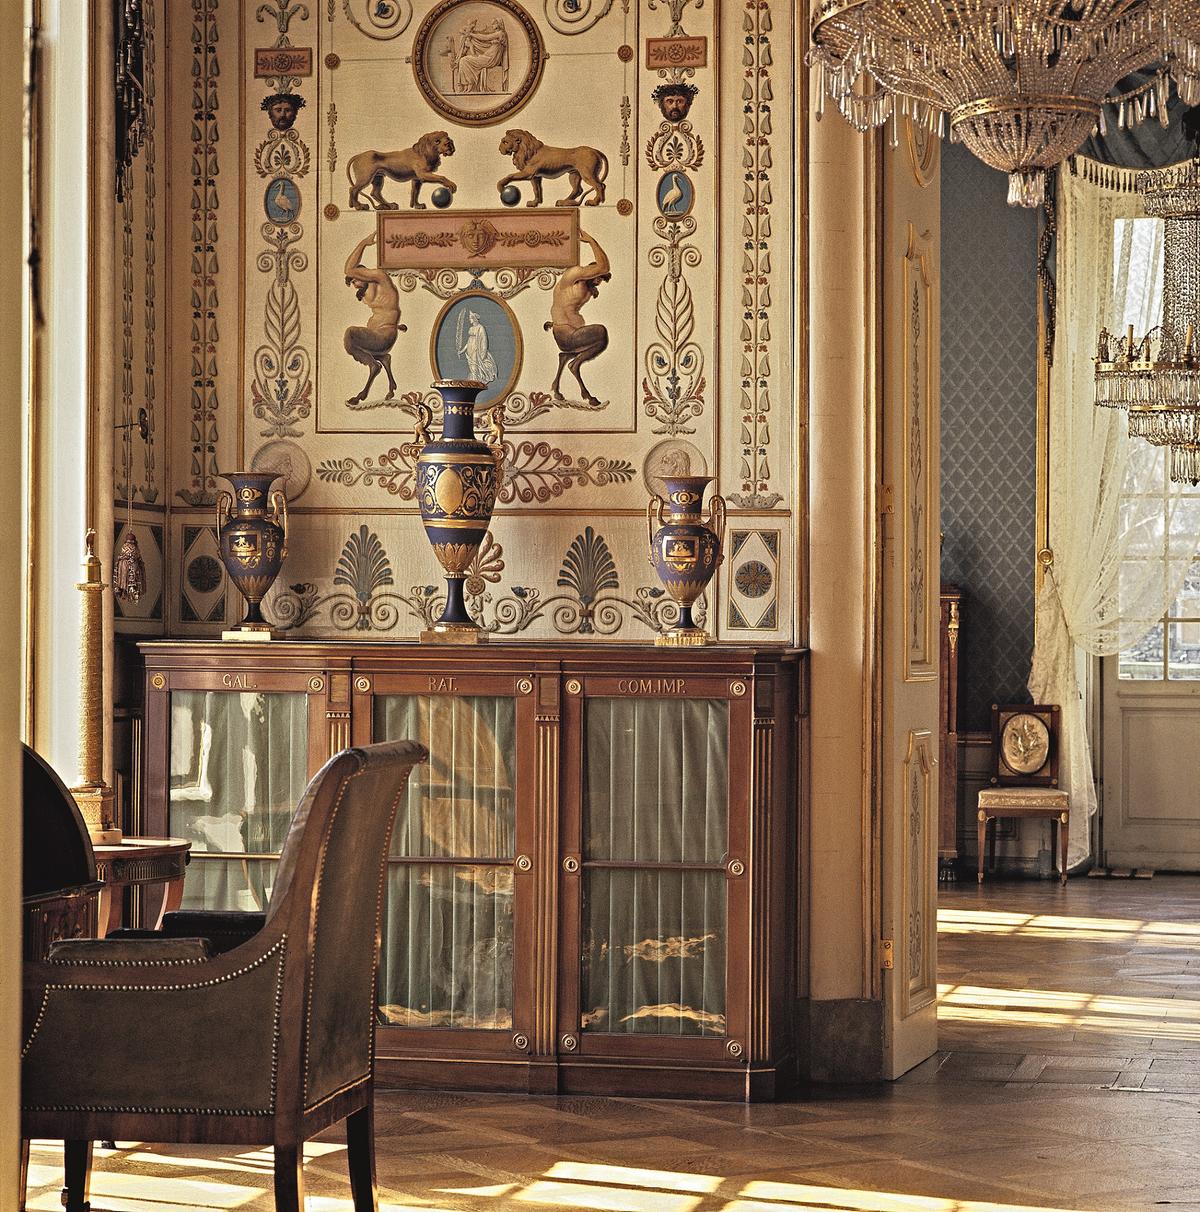 The records room. (Arnim Weischer/State Palaces and Gardens of Baden-Wuerttemberg)